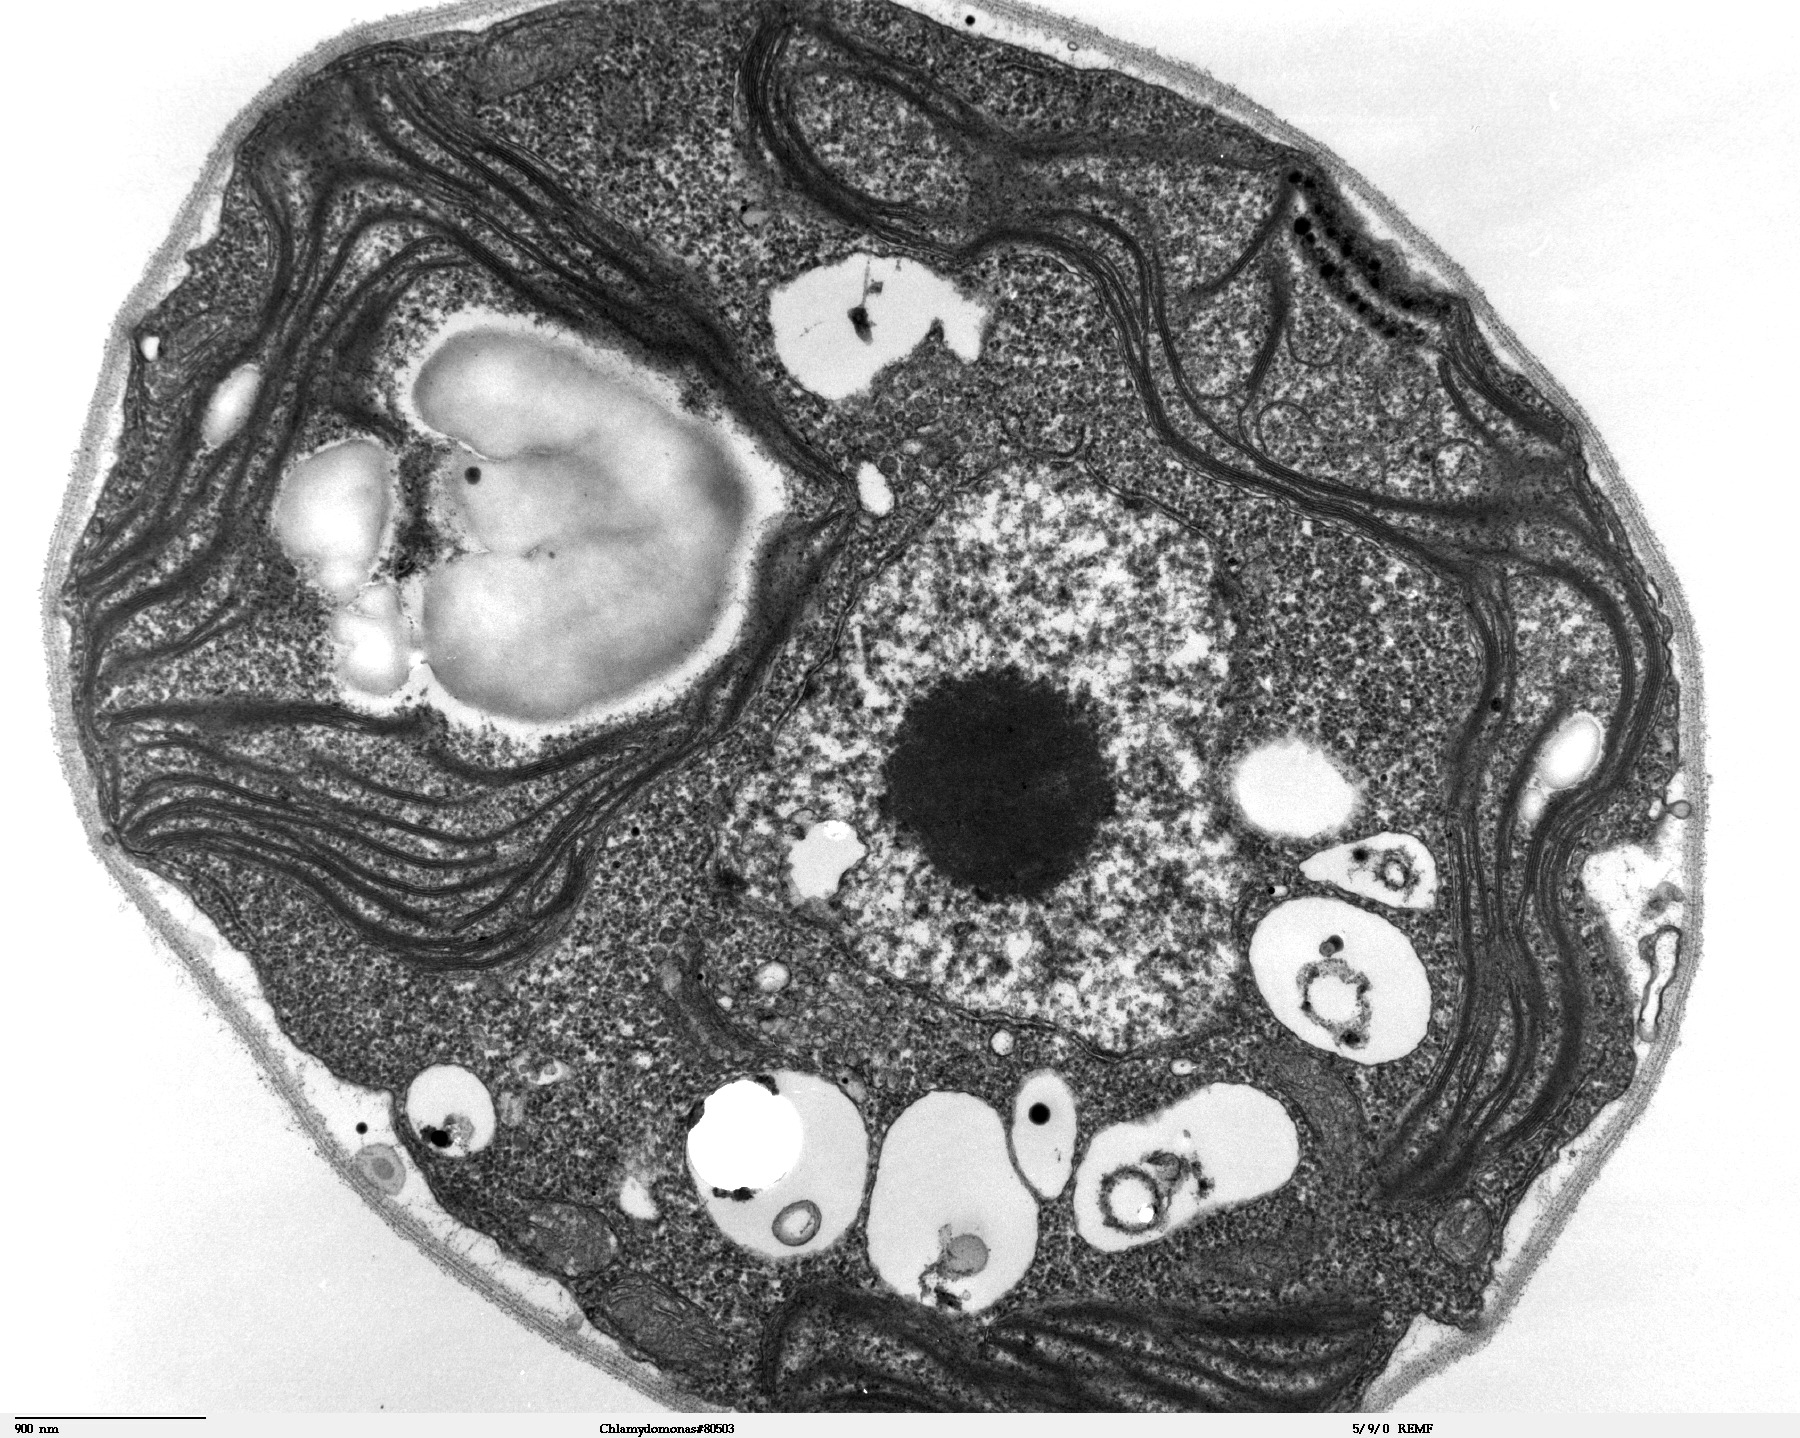 Electron microscope image of an algal cell. The image is black and white. The cell is roughly round. Several round structures are visible within the cell, including the nucleus. There are also what appear to be long filaments throughout the cytoplasm.